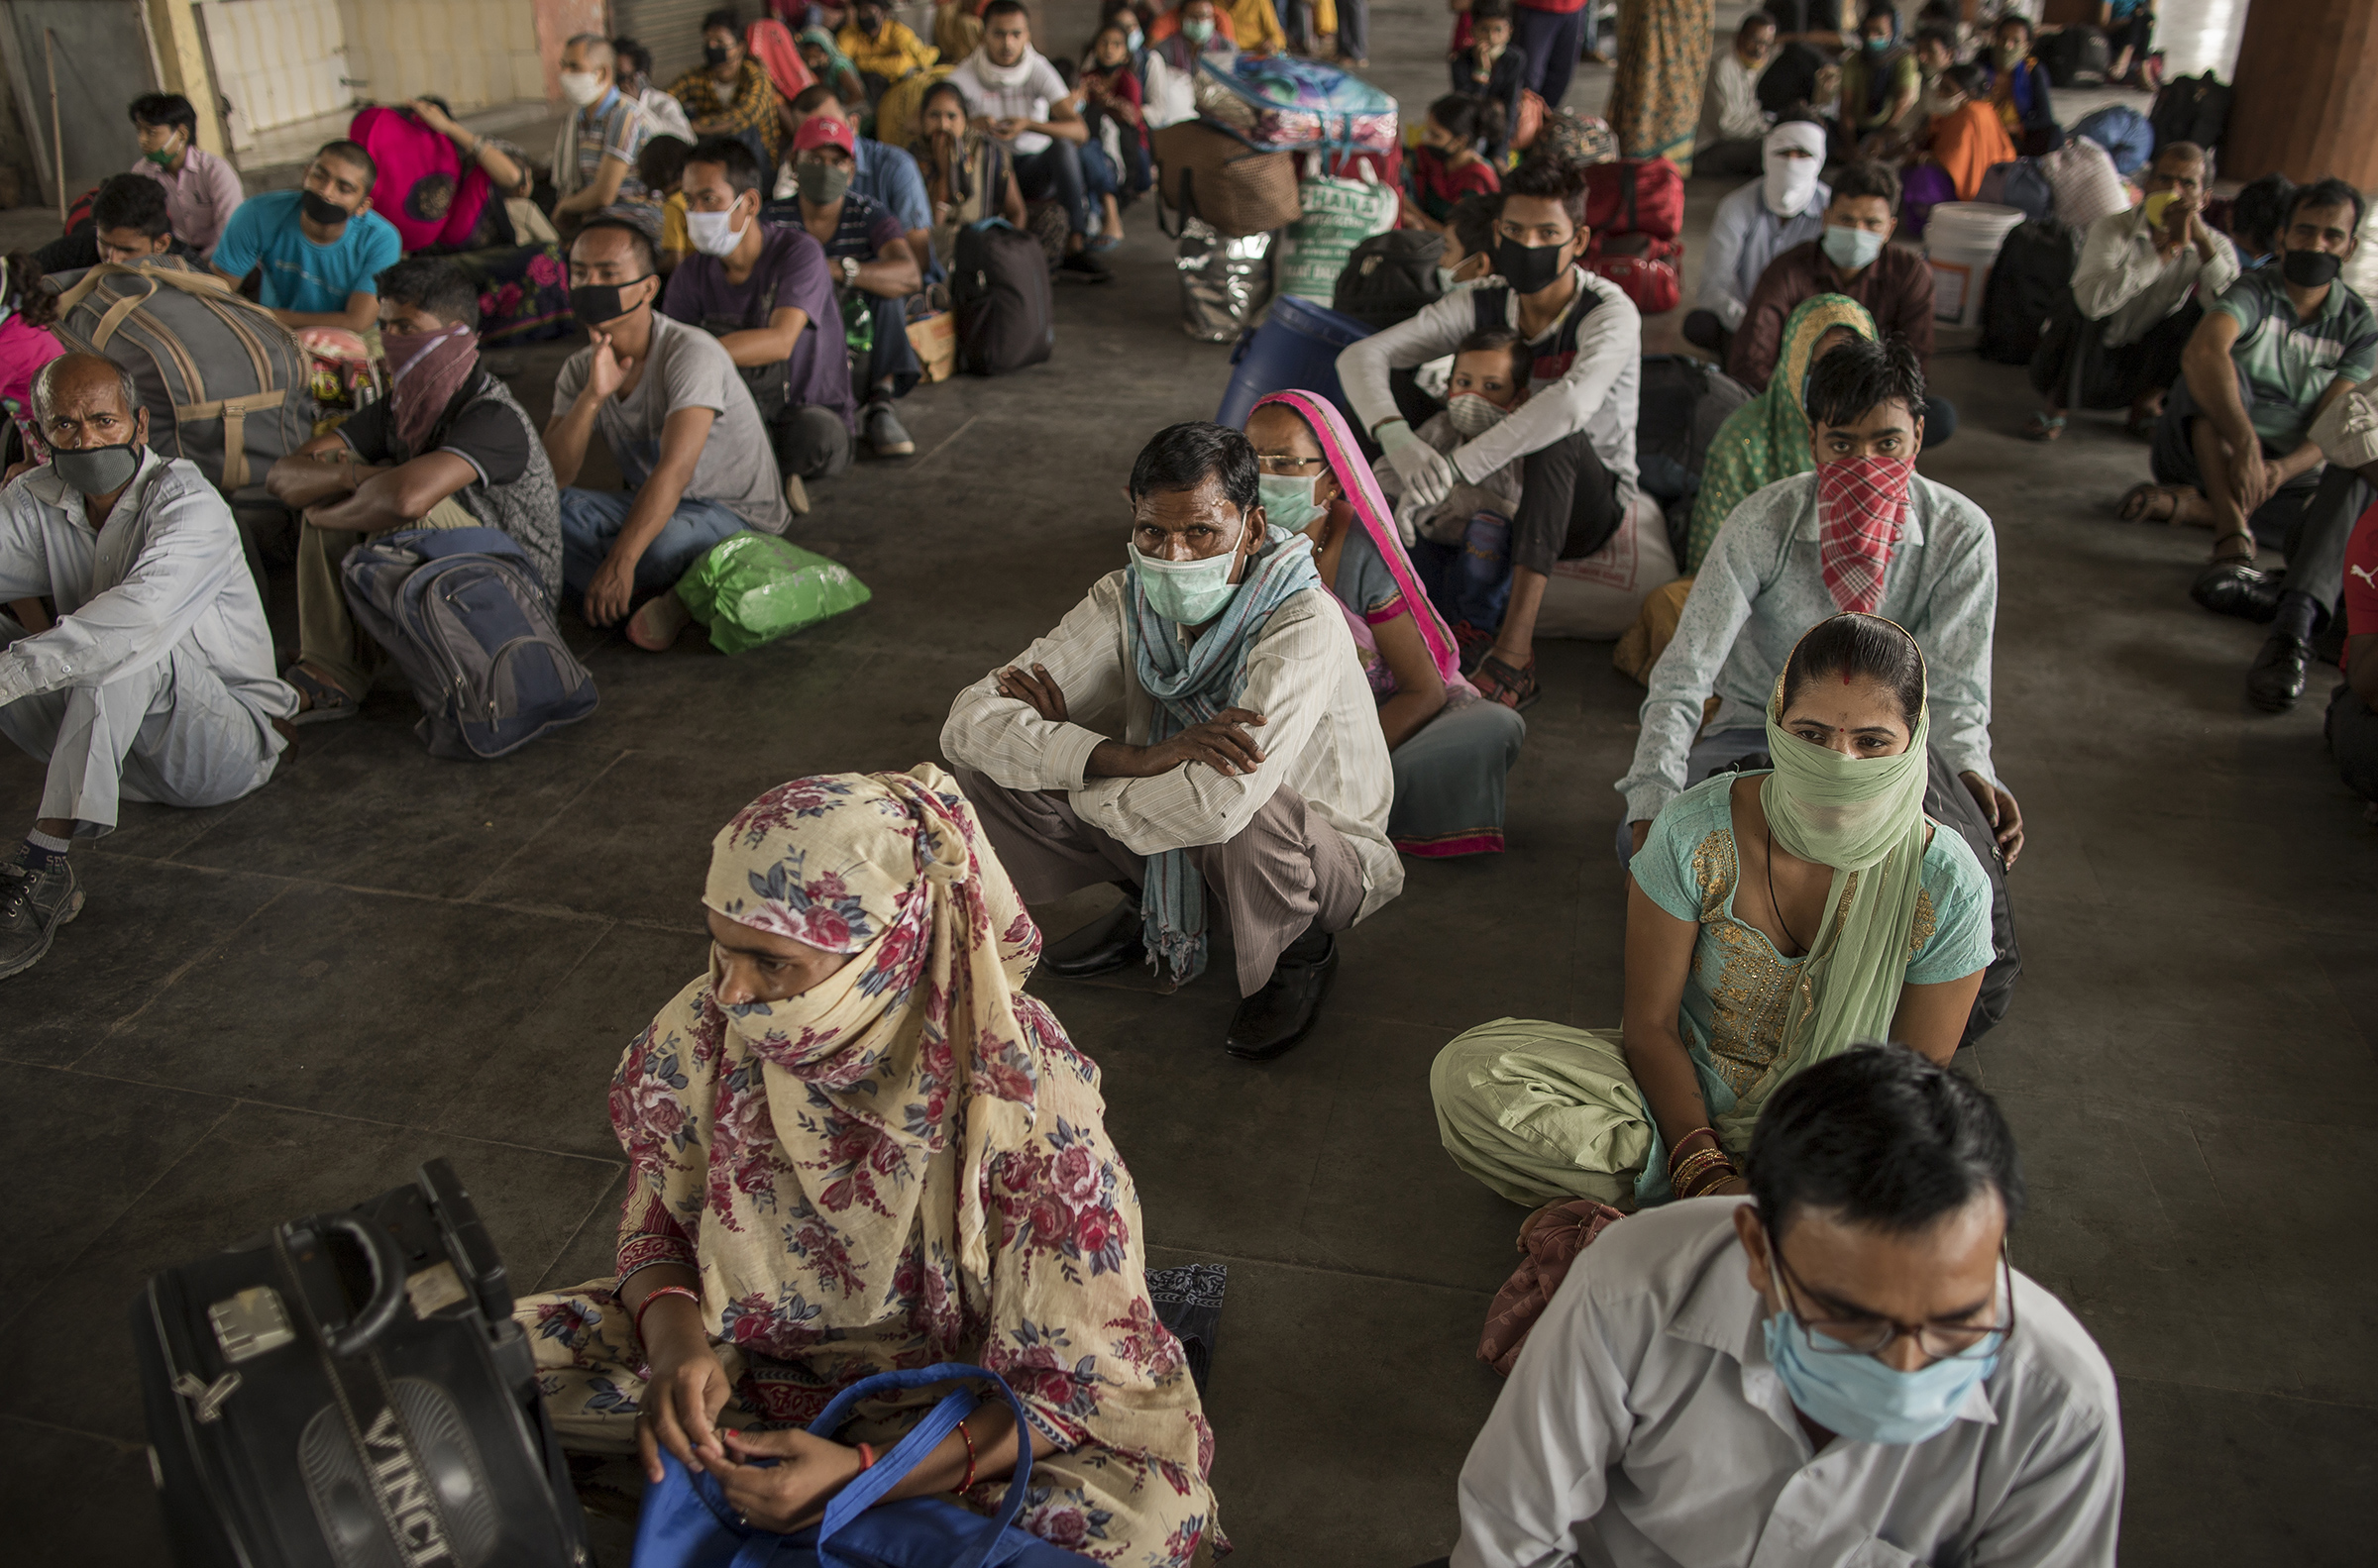 Migrant workers sit at a bus terminal as they wait to catch state-provided transportation to their home villages, in Greater Noida, Uttar Pradesh, on May 29, 2020. Migrant workers, who form part of India's vast informal sector, were the worst hit by the shutdown. Millions lost jobs and incomes. (Anindito Mukherjee—Bloomberg/Getty Images)